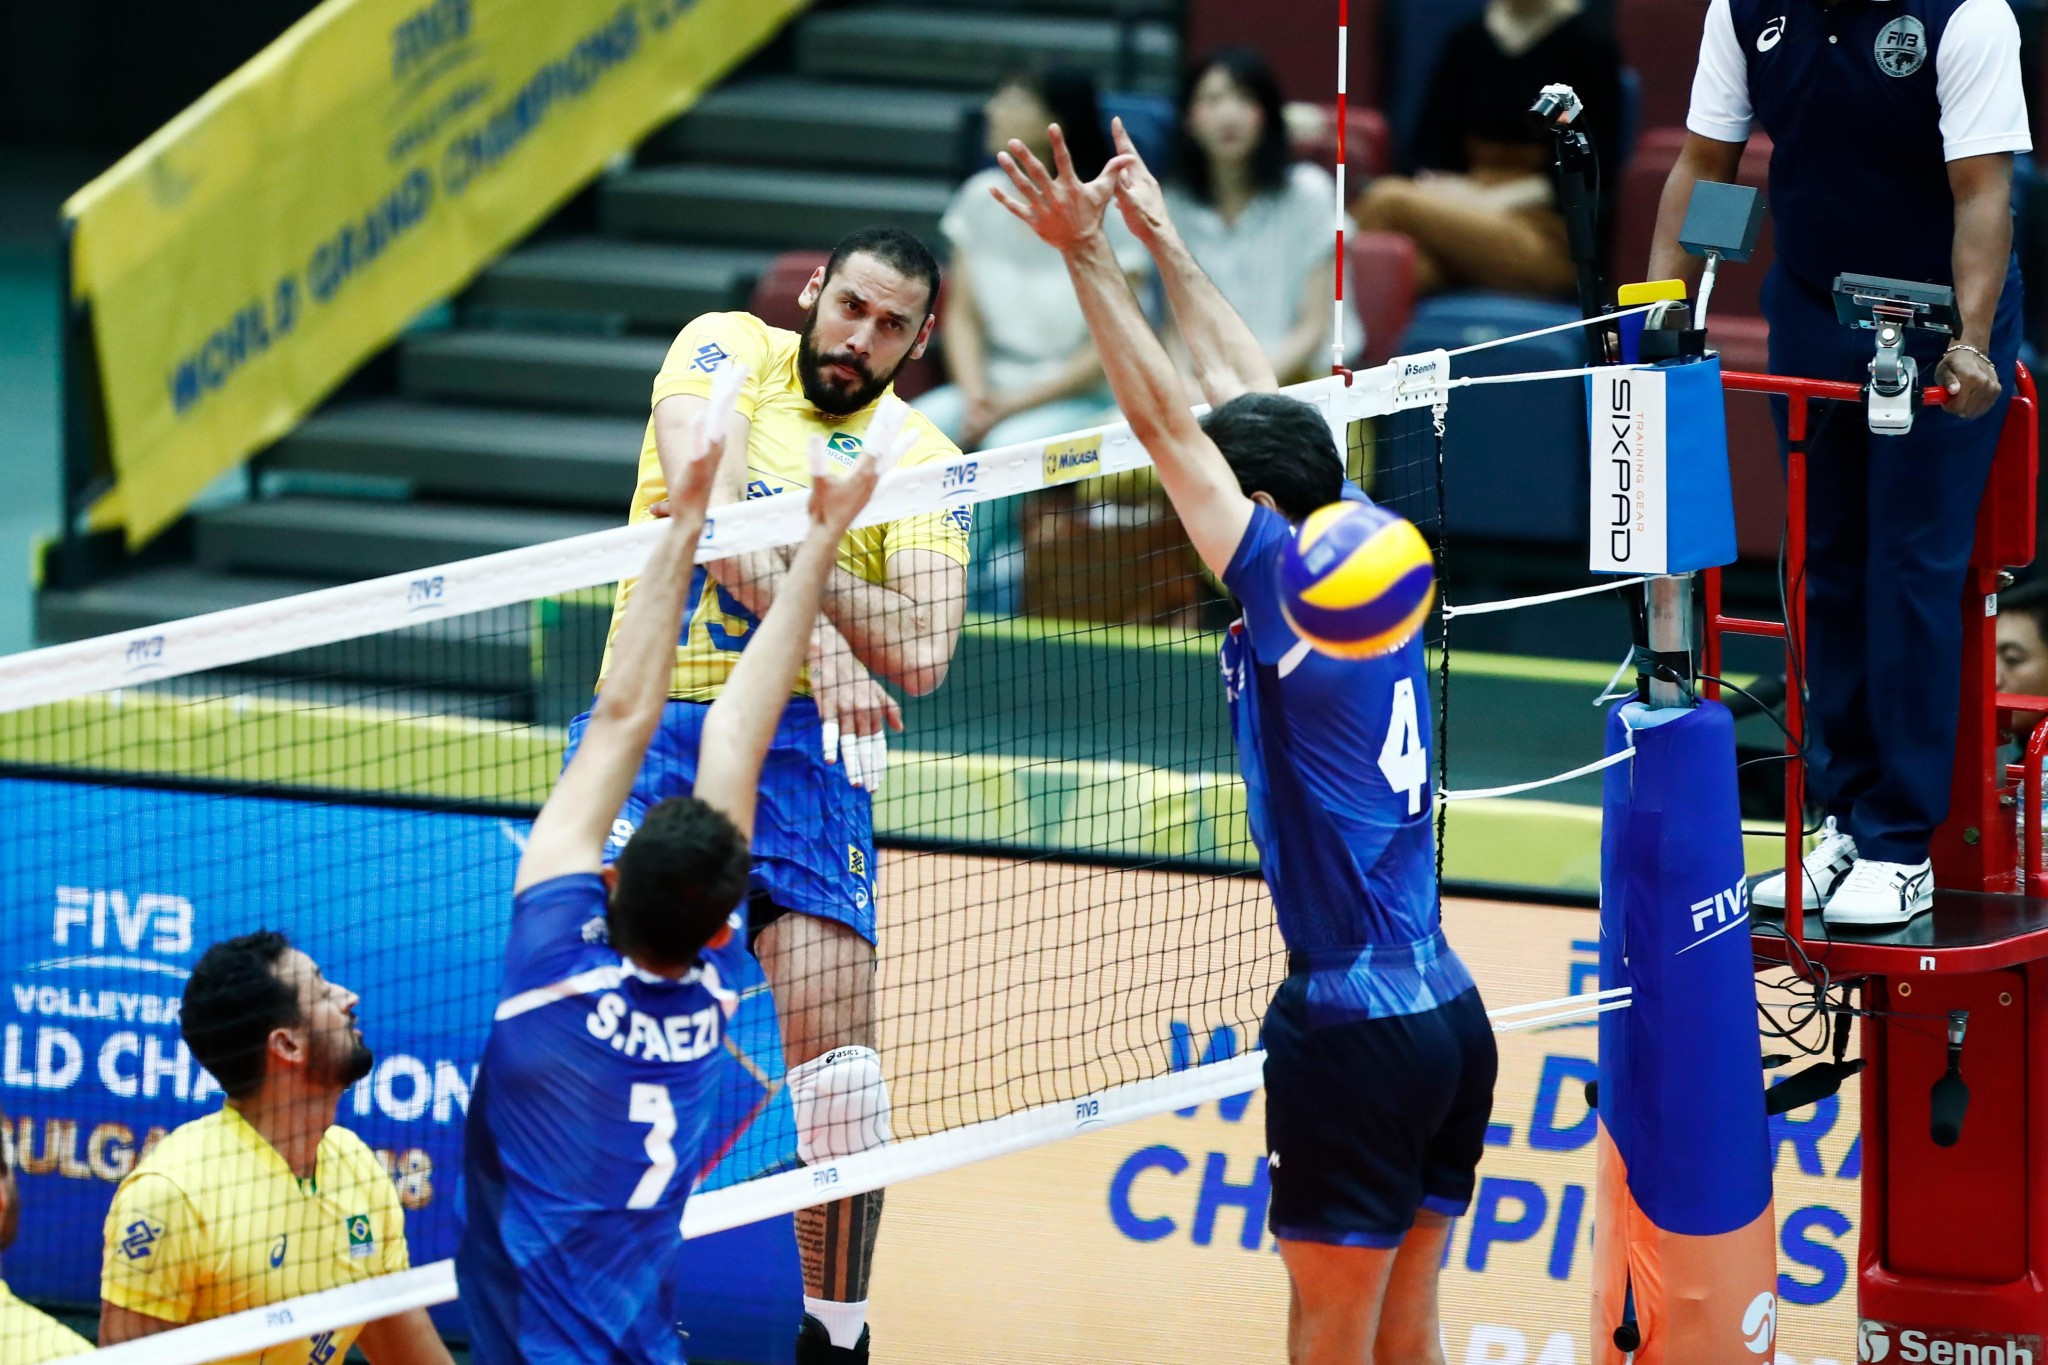 Brazil ended Iran's perfect start with a straight sets win ©FIVB